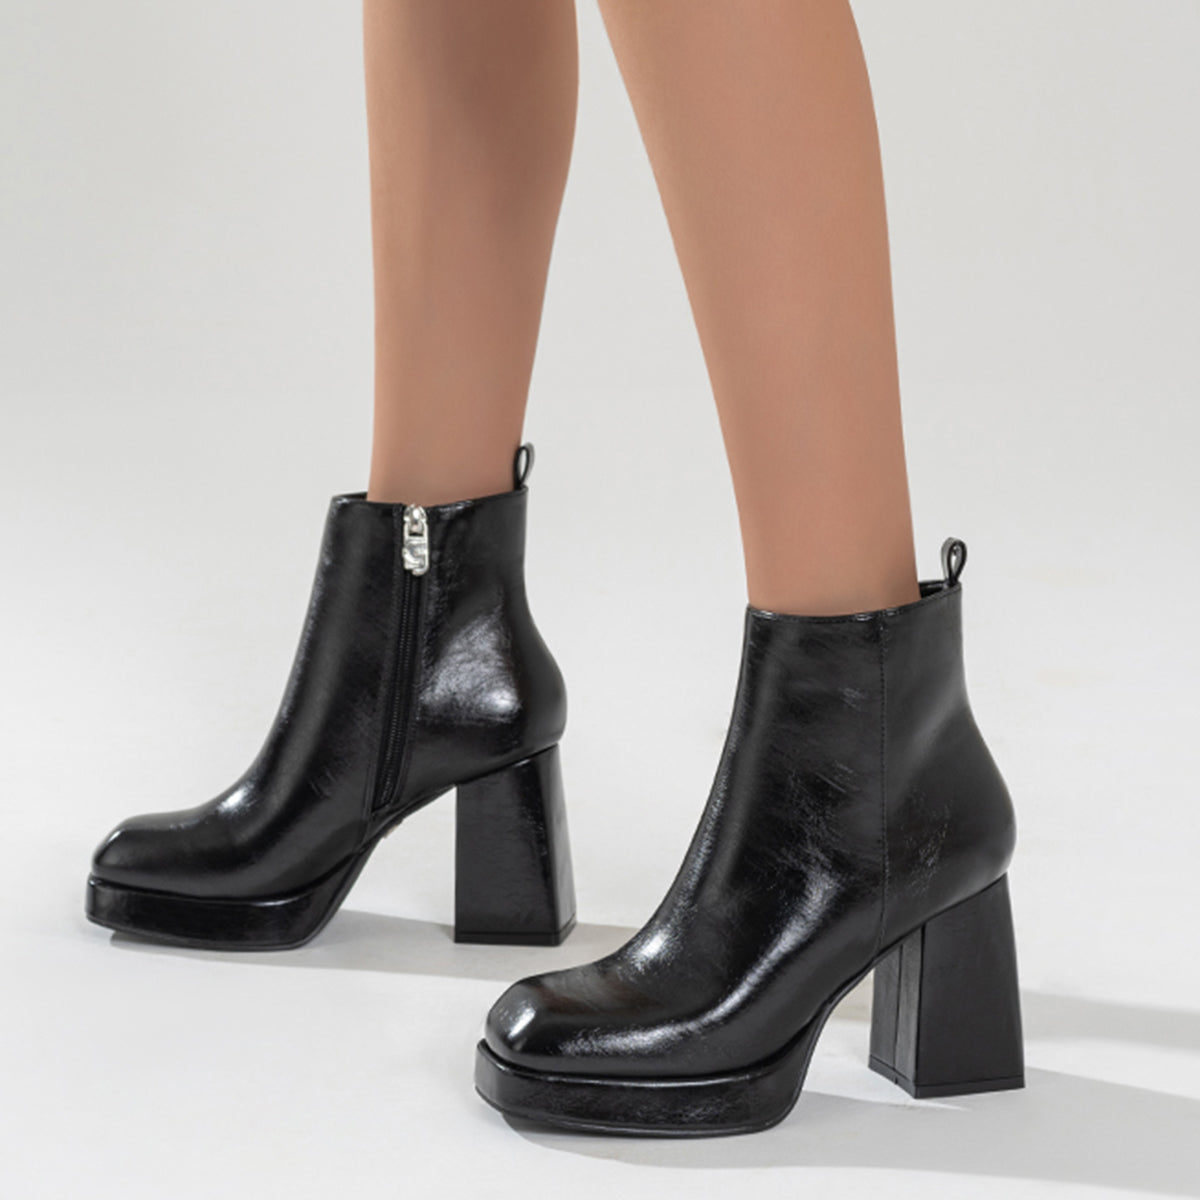 Veooy Black Square Toe Platform Chunky Heeled Ankle Boots